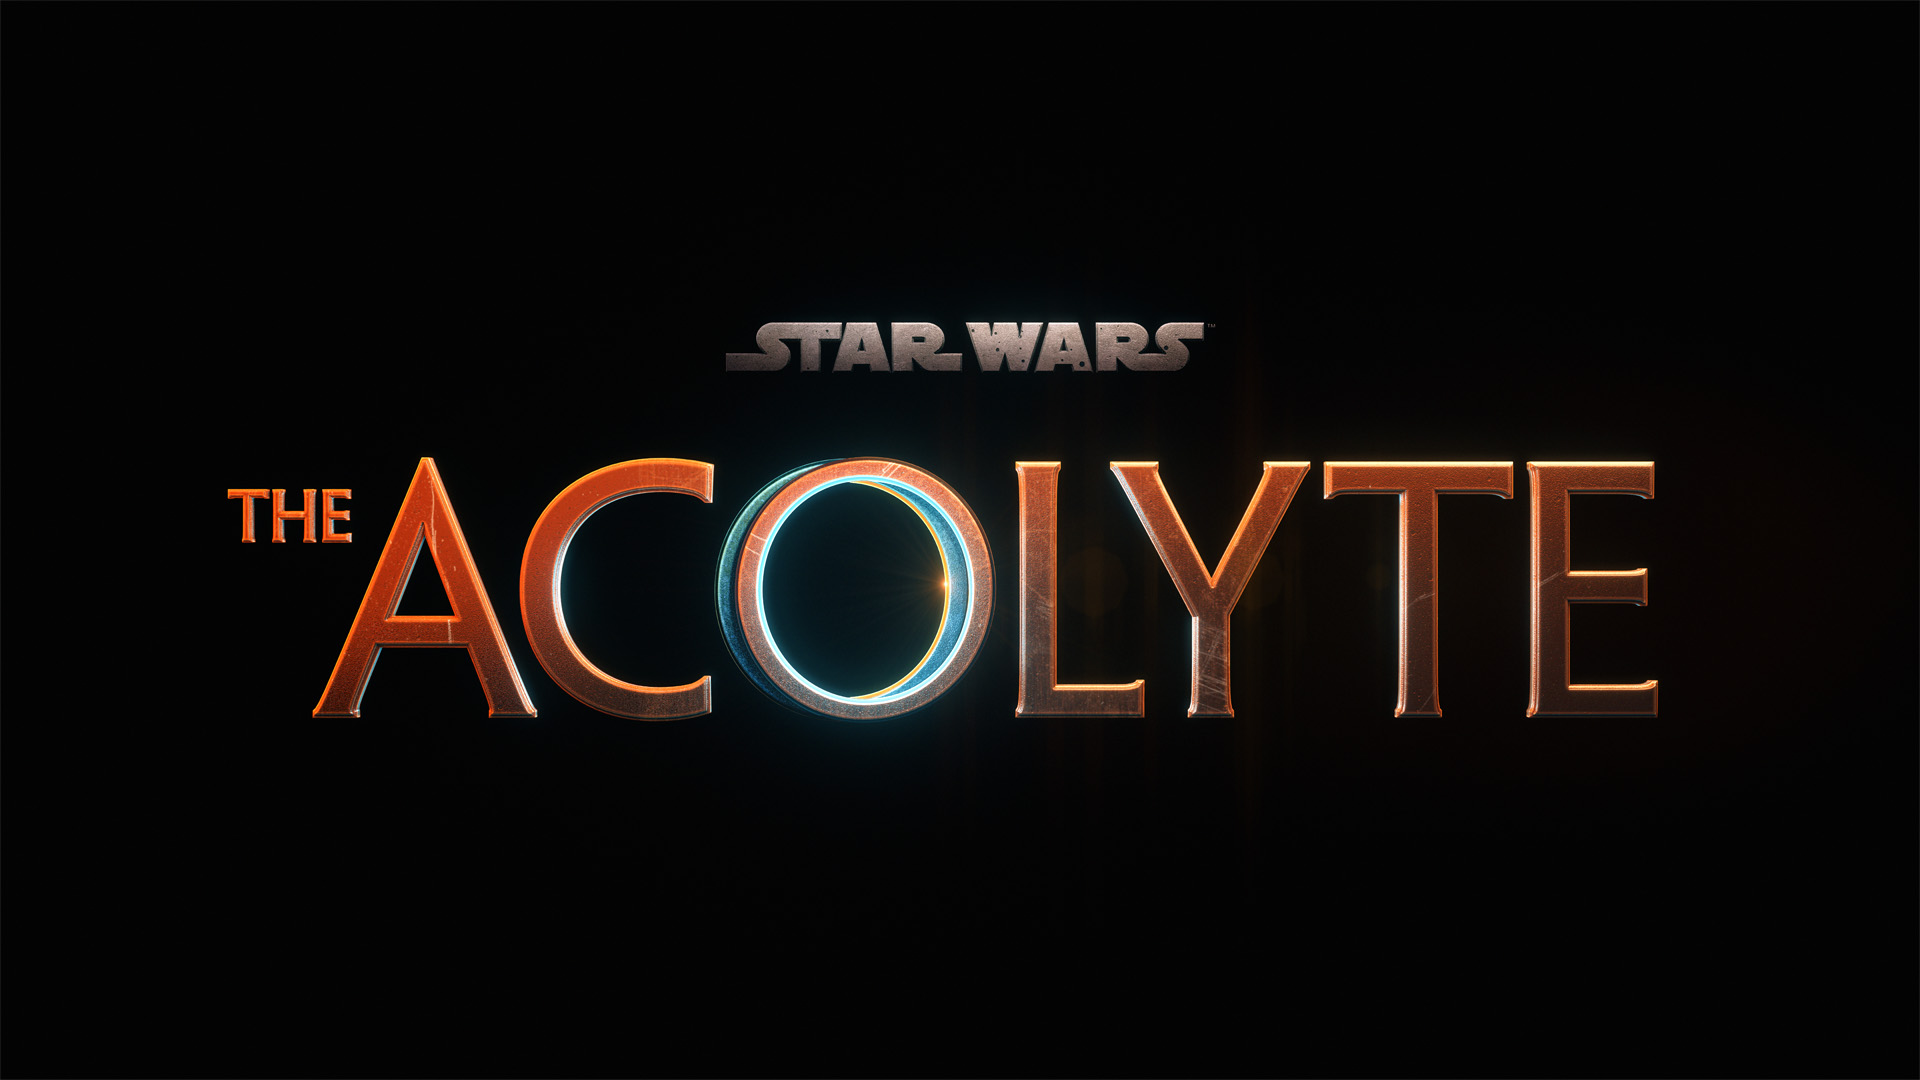 Star Wars: The Acolyte seemingly lands a Disney Plus release date – and a trailer could arrive soon